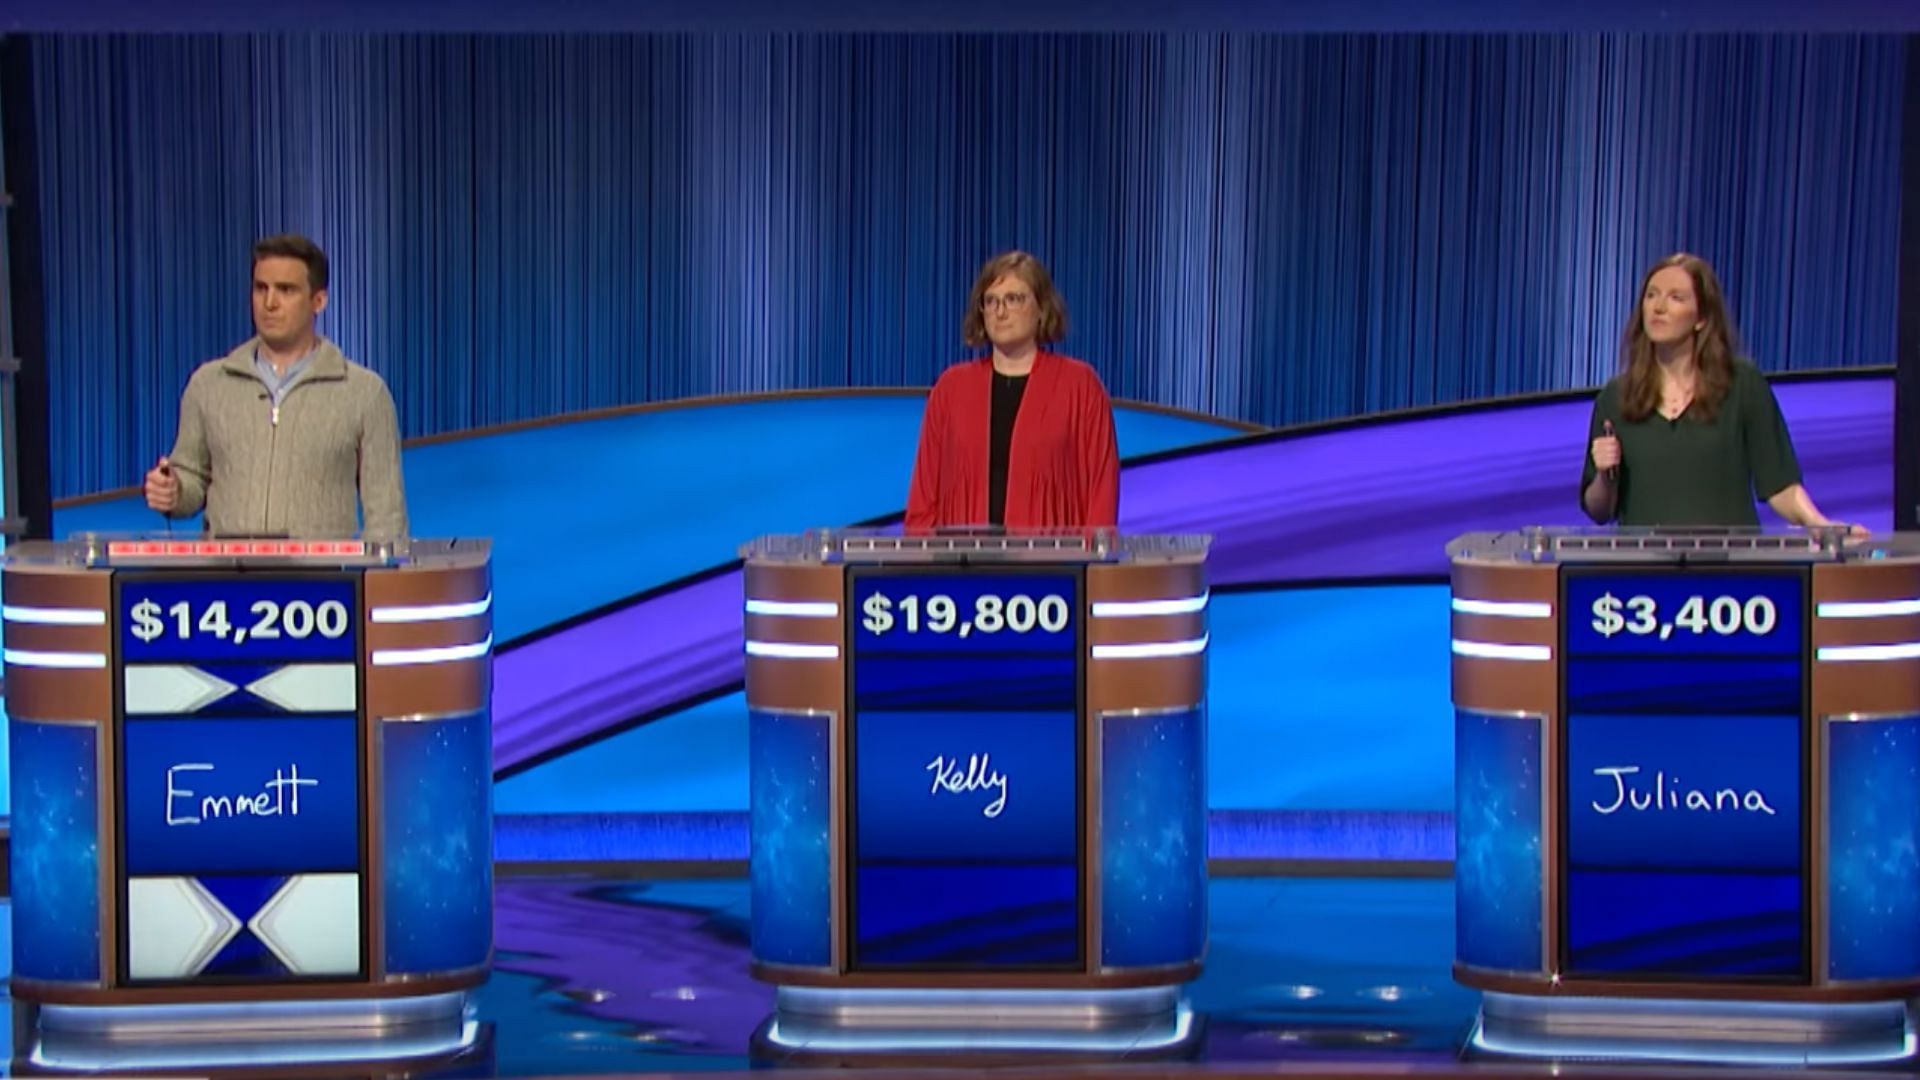 Three players participated in the September 20 episode